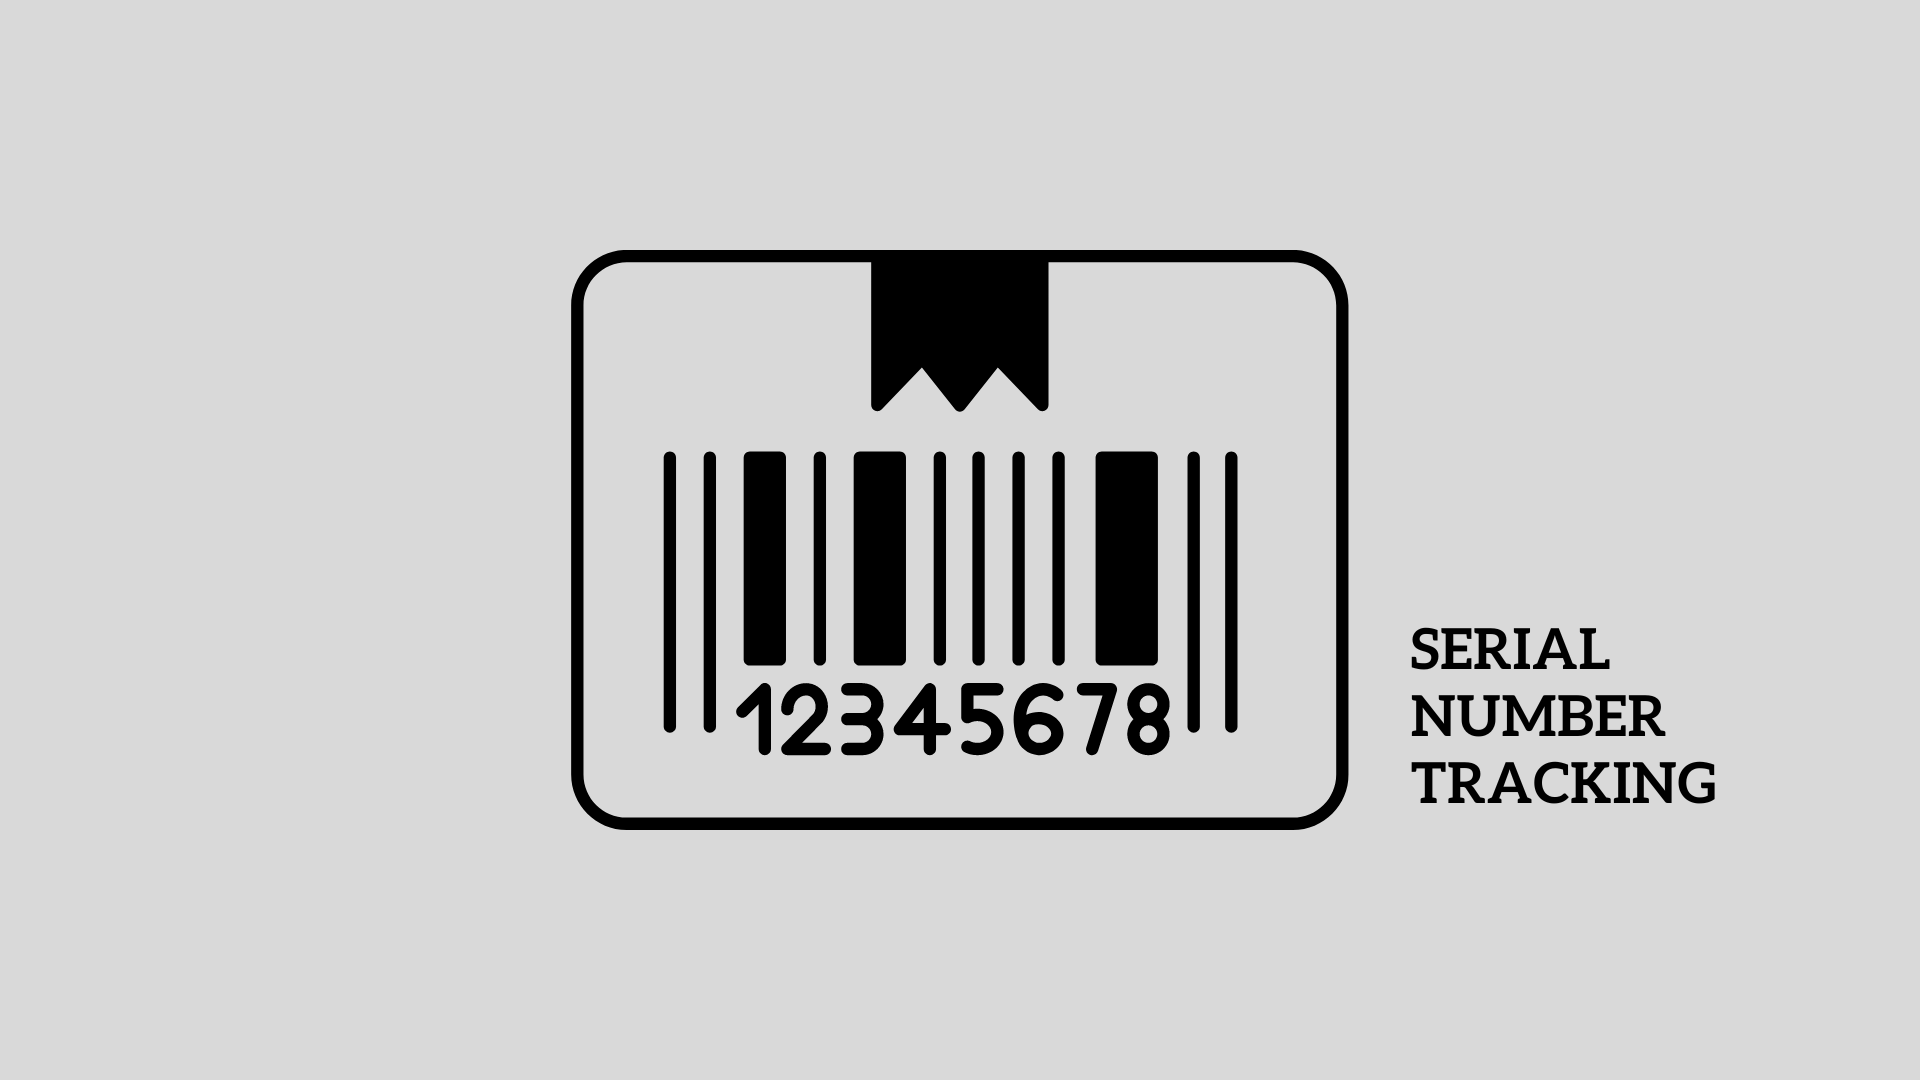 All You Need To Know About Serial Number Tracking